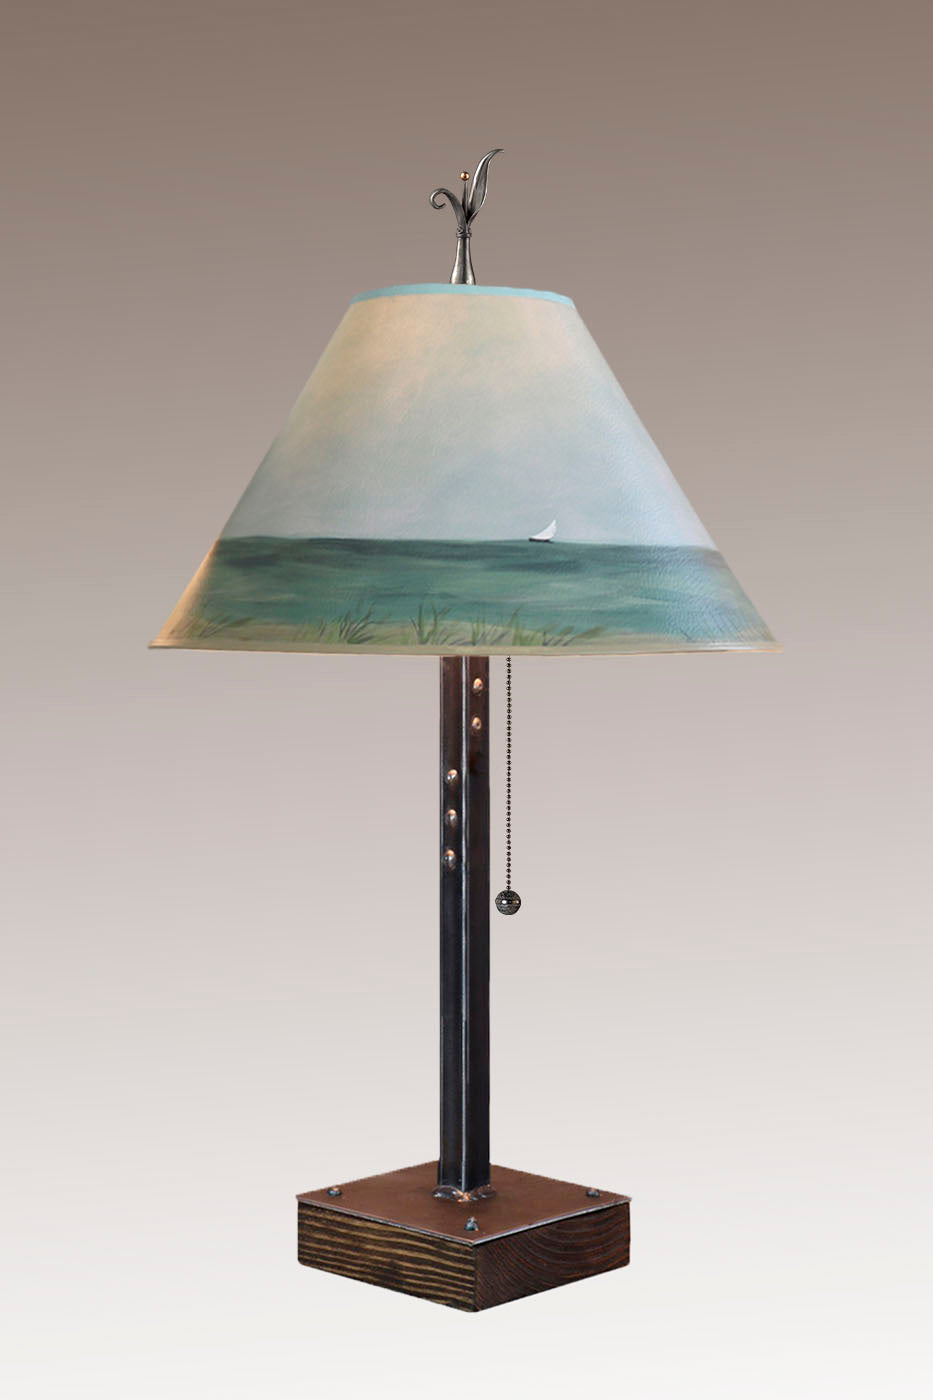 Janna Ugone & Co Table Lamps Steel Table Lamp on Wood with Medium Conical Shade in Shore